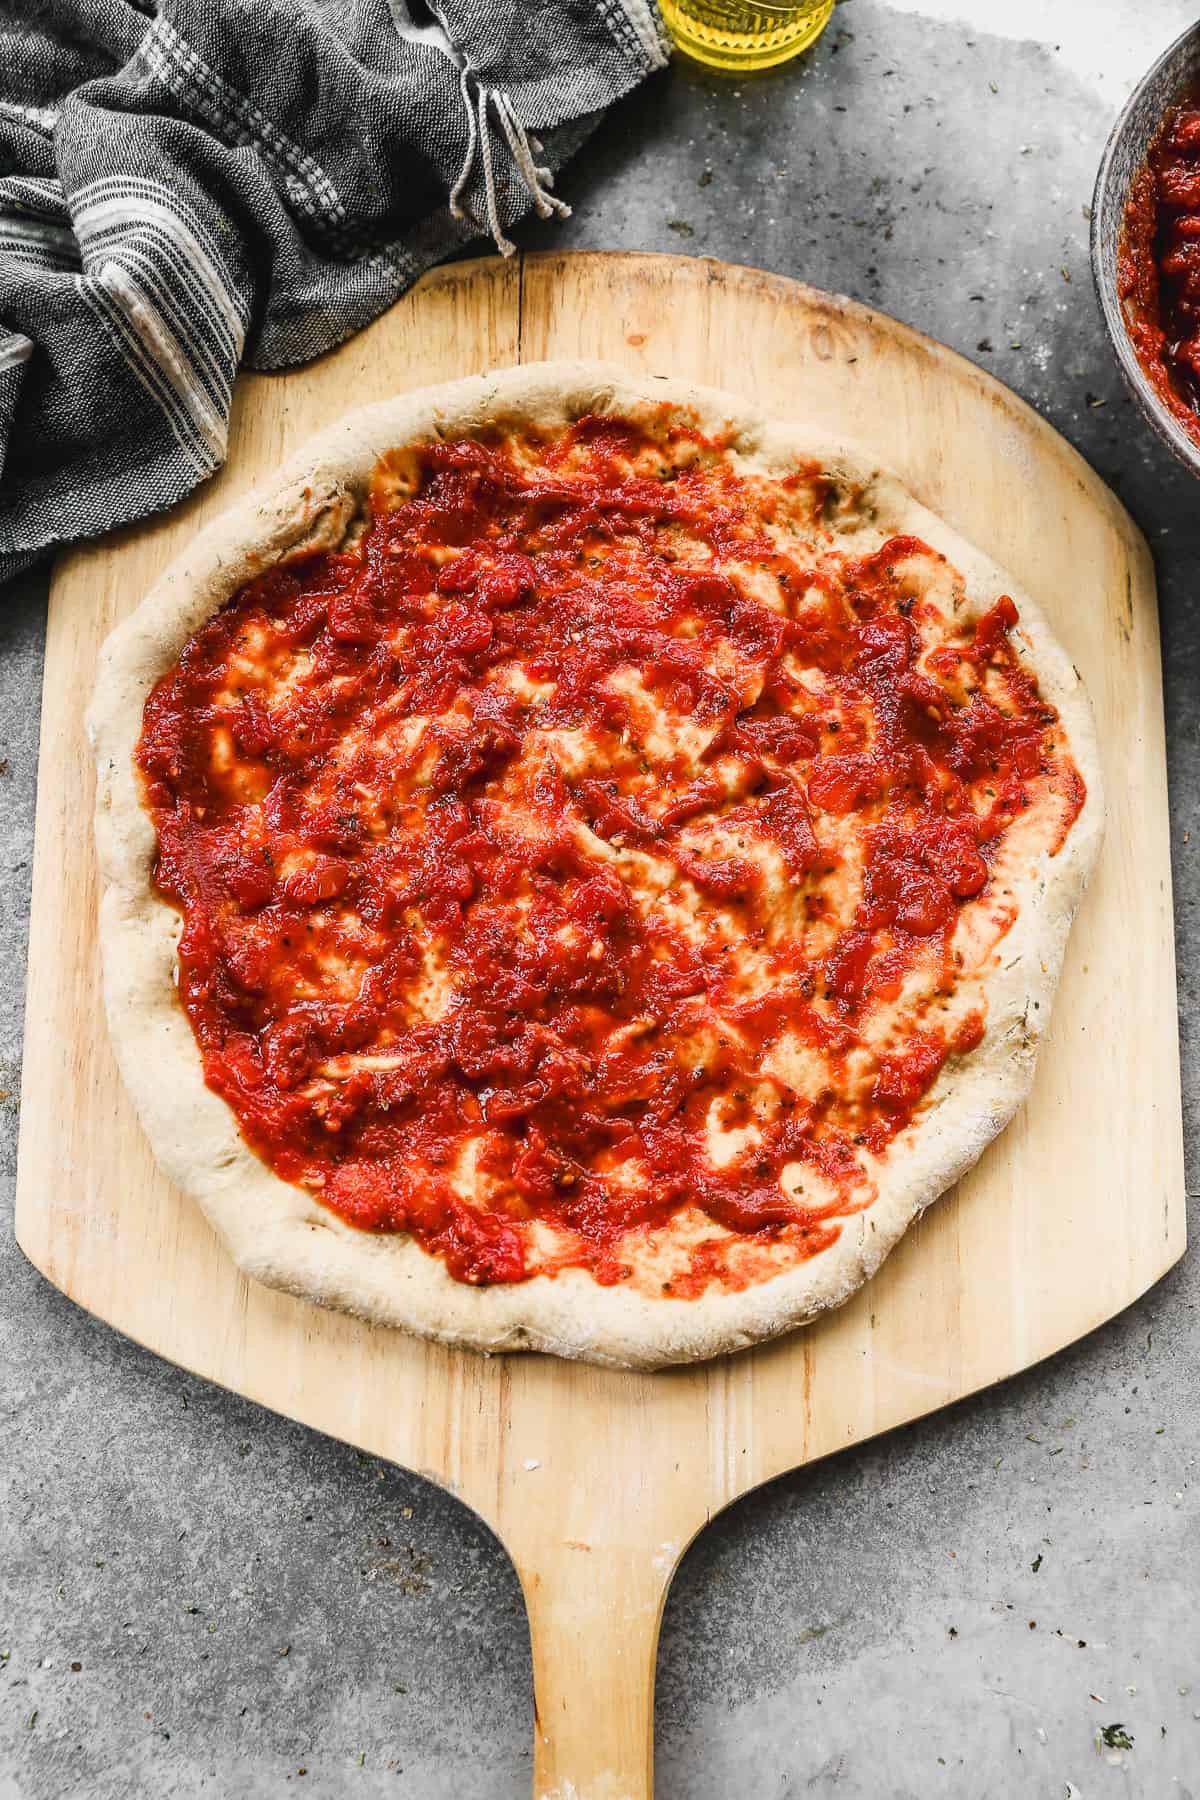 The best pizza sauce recipe spread on a homemade pizza crust.